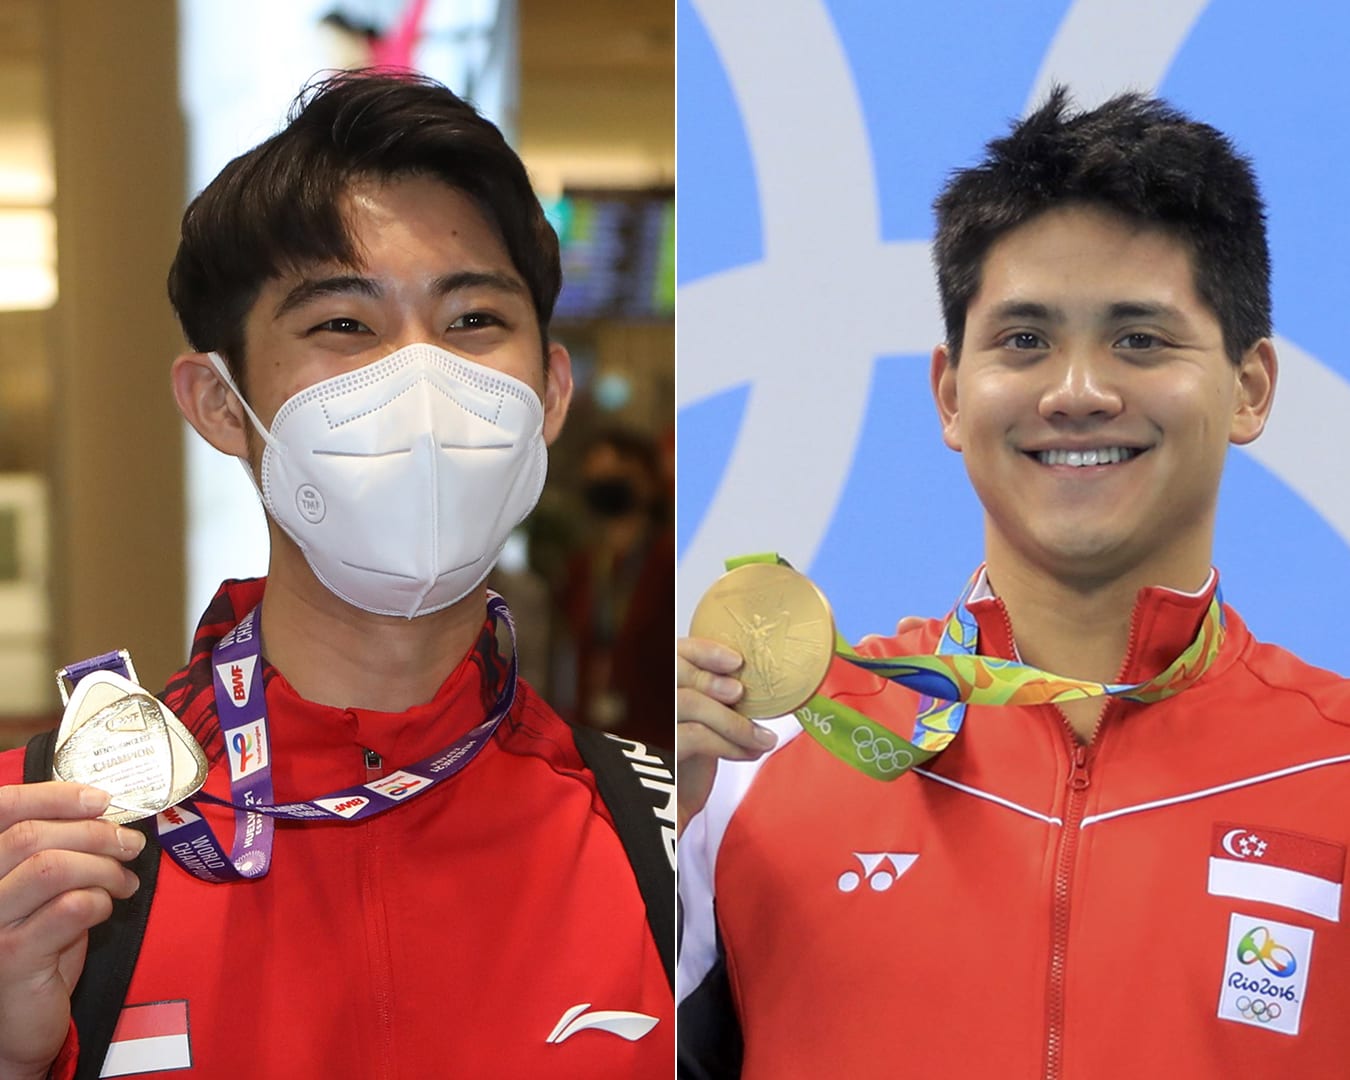 National shuttler Loh Kean Yew, seen here with the gold medal he won at the Badminton World Championship in December last year, and Joseph Schooling with his gold medal at the Rio Olympics in 2016.